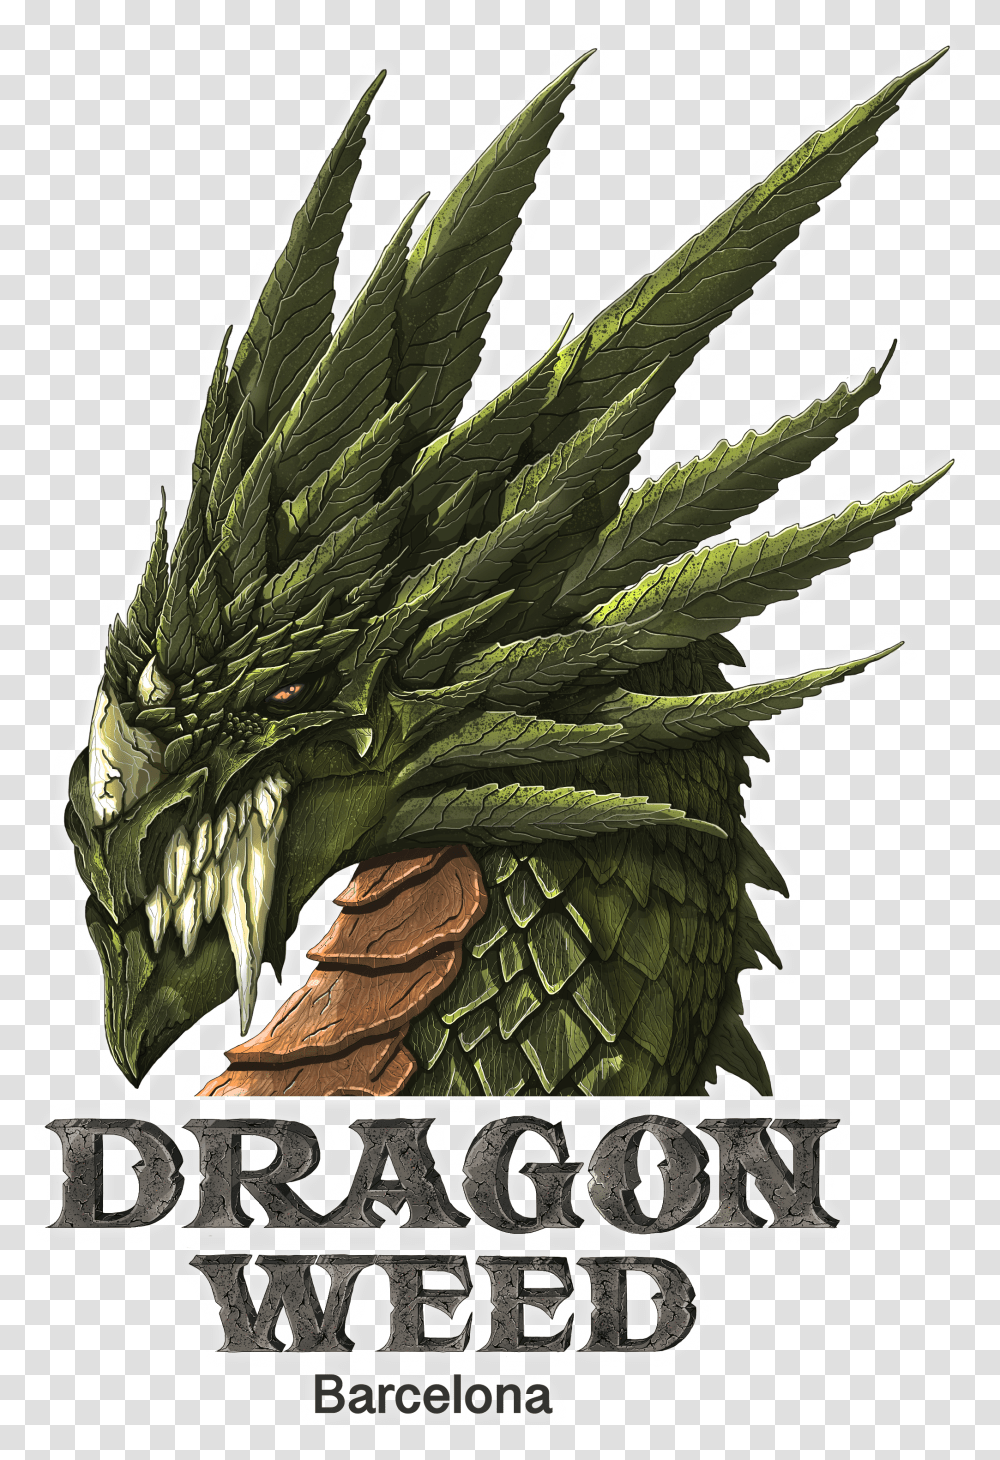 Dragon Weed Cannabis Club Dragon Weed Barcelona Poster Transparent Png